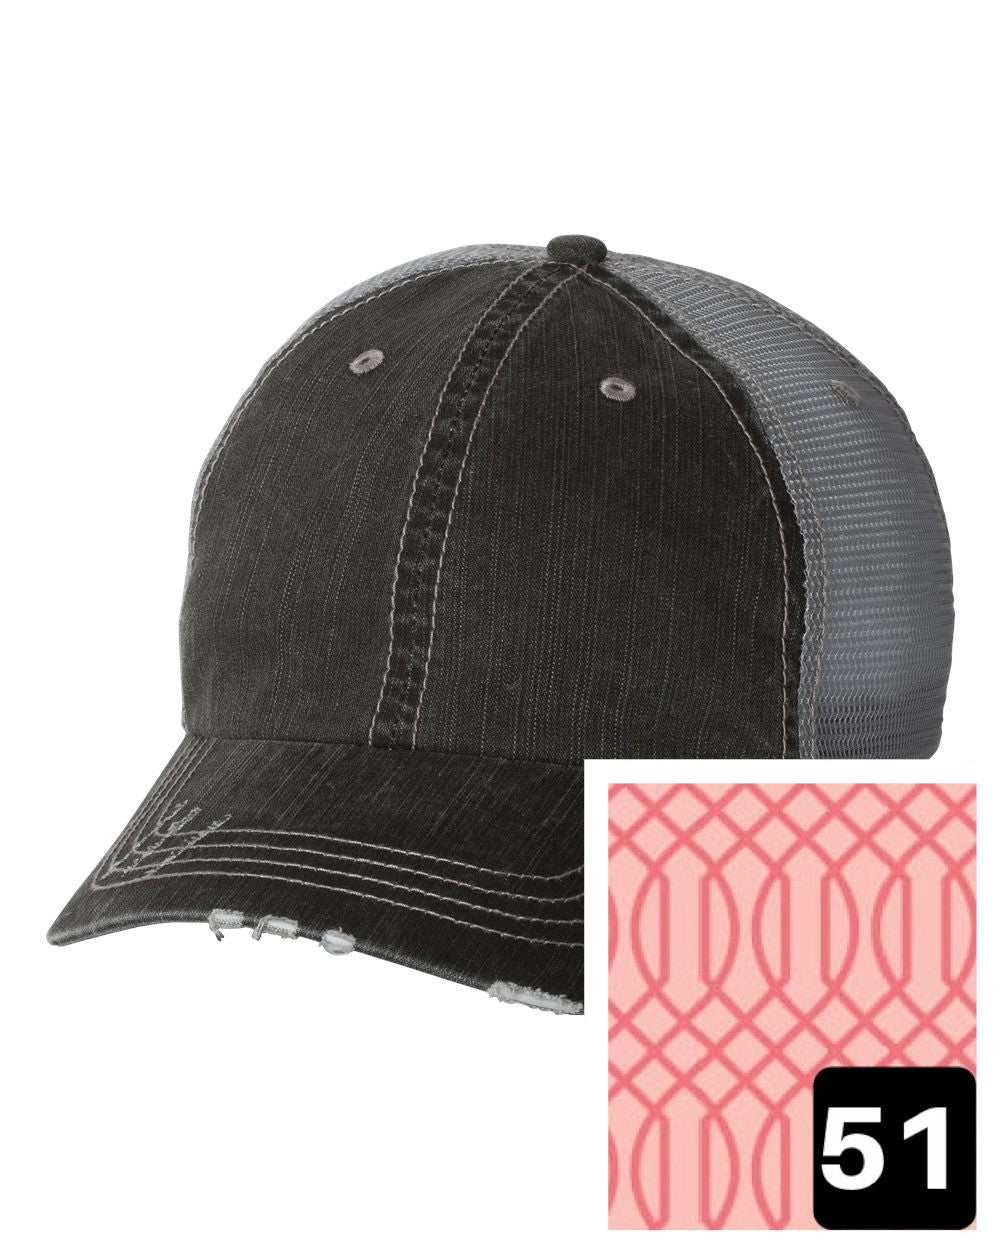 gray distressed trucker hat with white on gray hatch fabric state of Mississippi